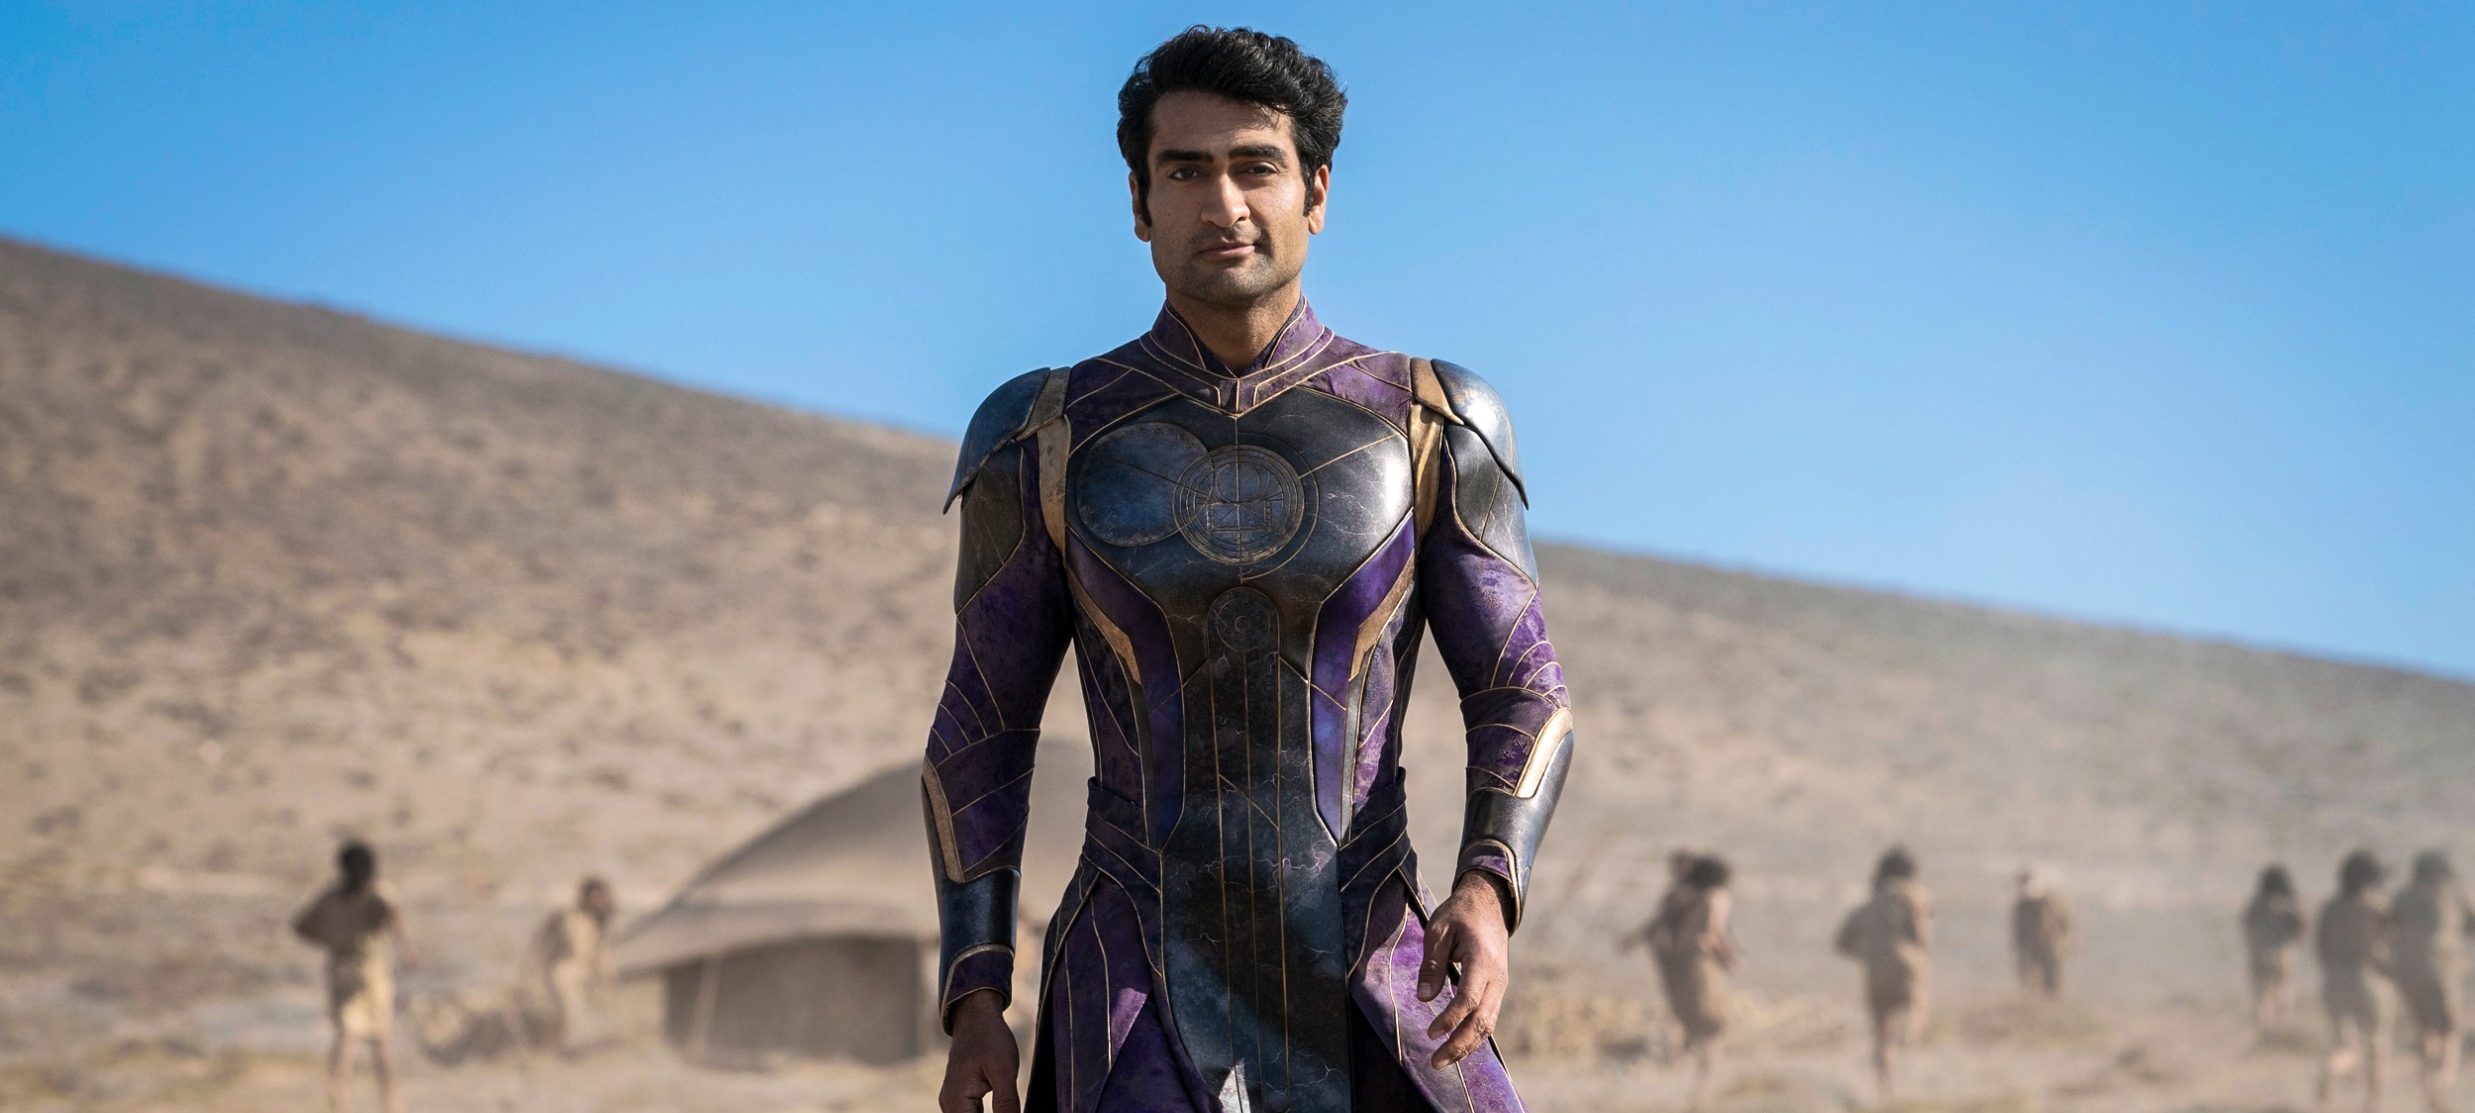 Kumail Nanjiani: All Upcoming Movies and TV Shows in 2023 and 2024